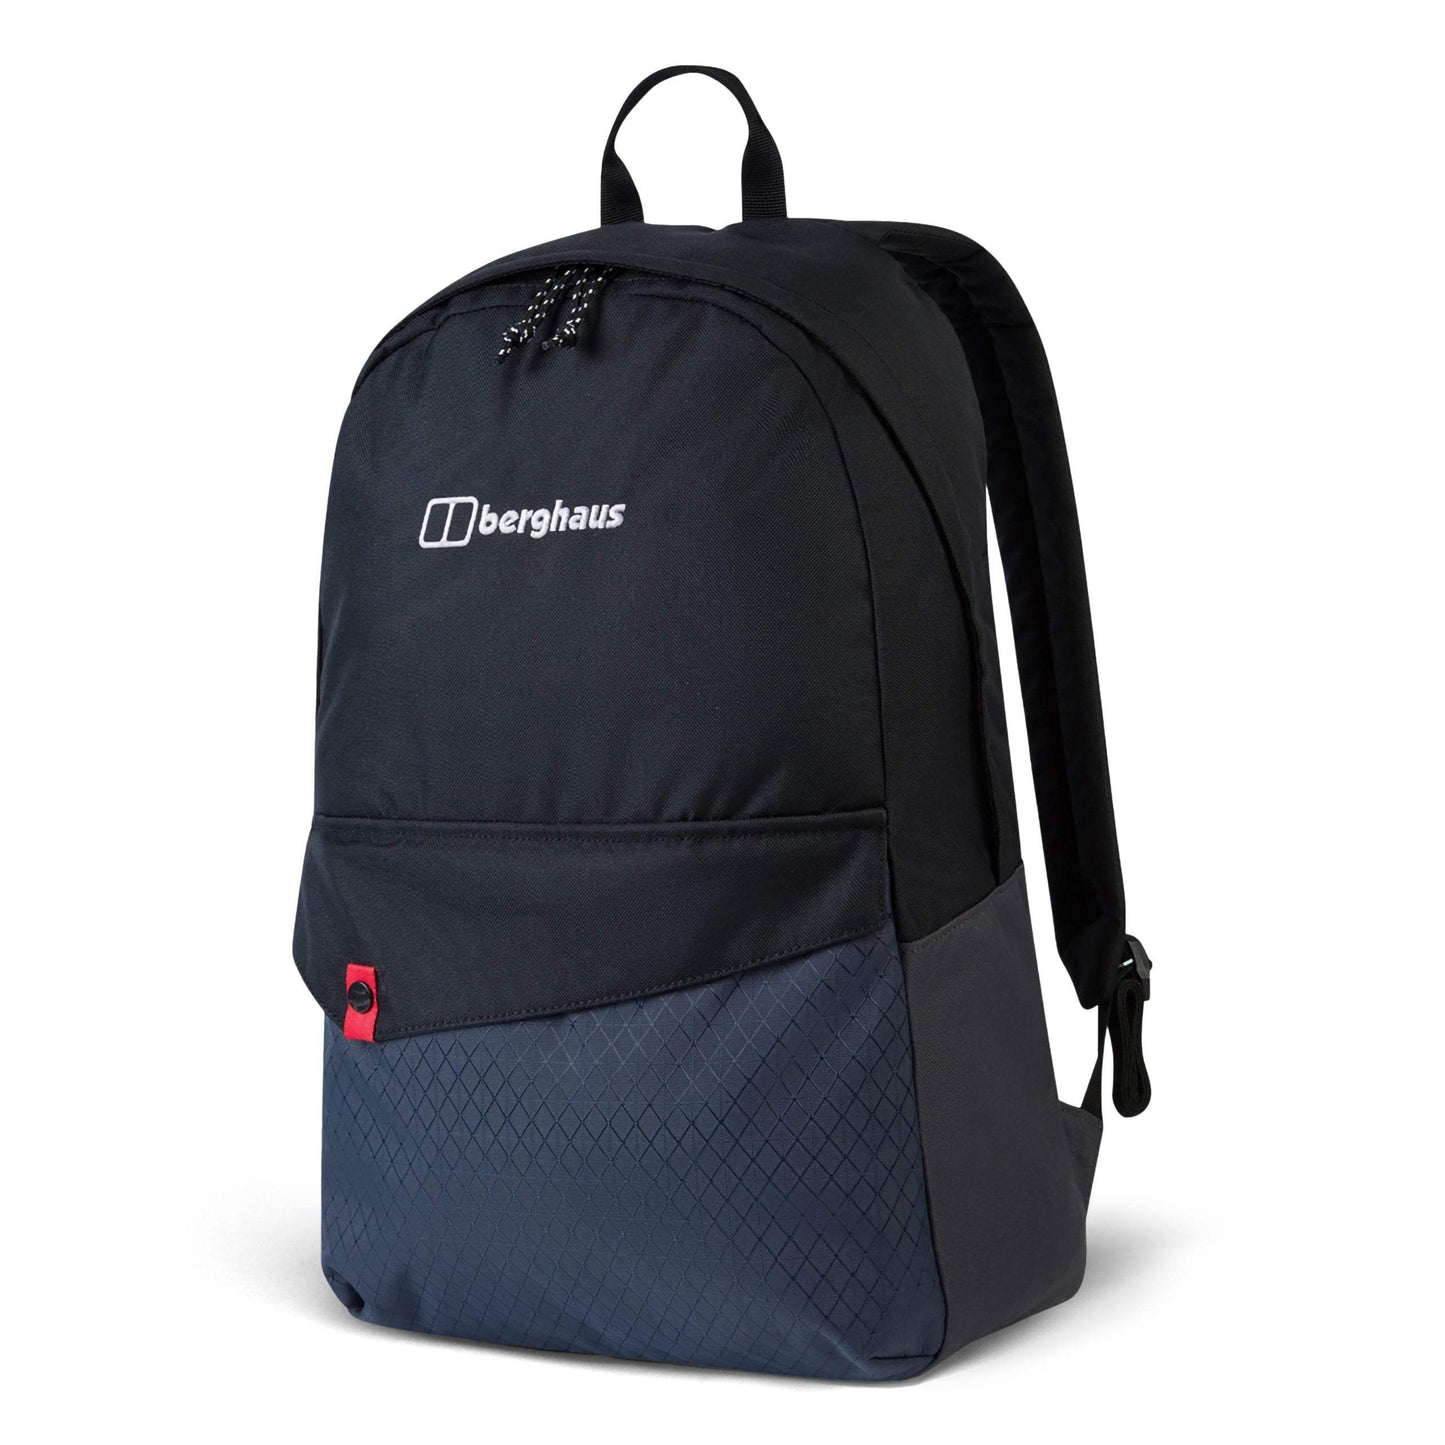 Berghaus Brand Bag - The Luxury Promotional Gifts Company Limited